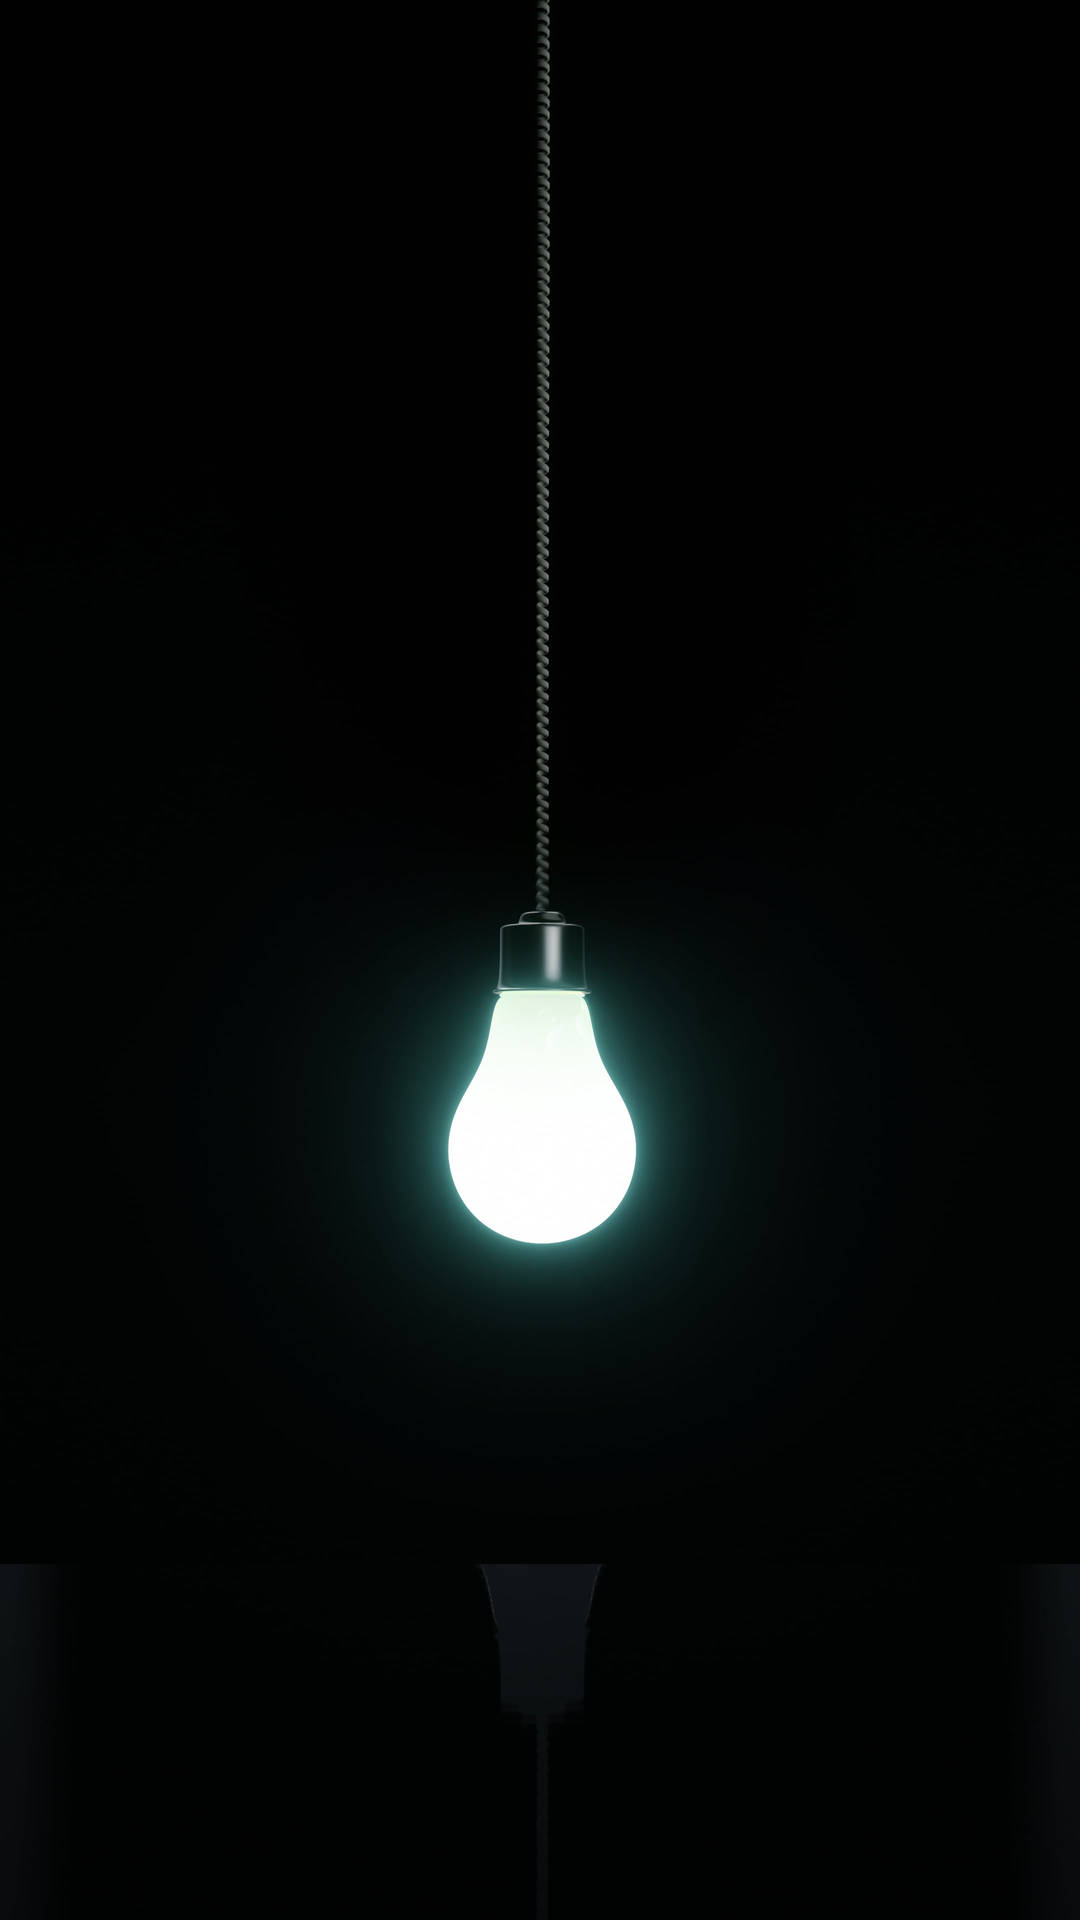 Stunning Oled Hanging Light Bulb In Dim Environment Background